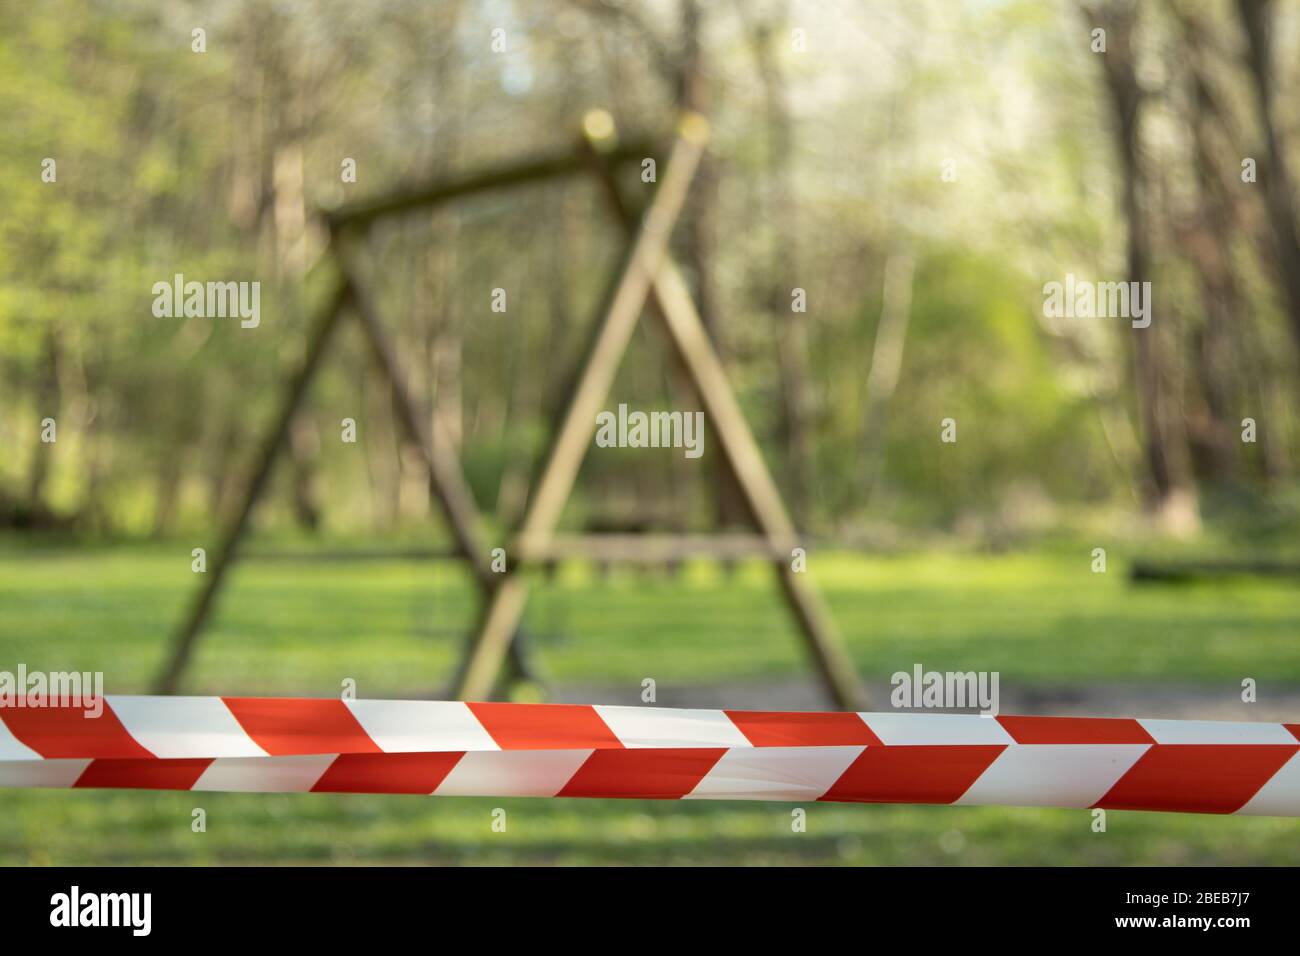 cordoned off playground with children's swing, surroundet by trees, forcus on barrier tape Stock Photo